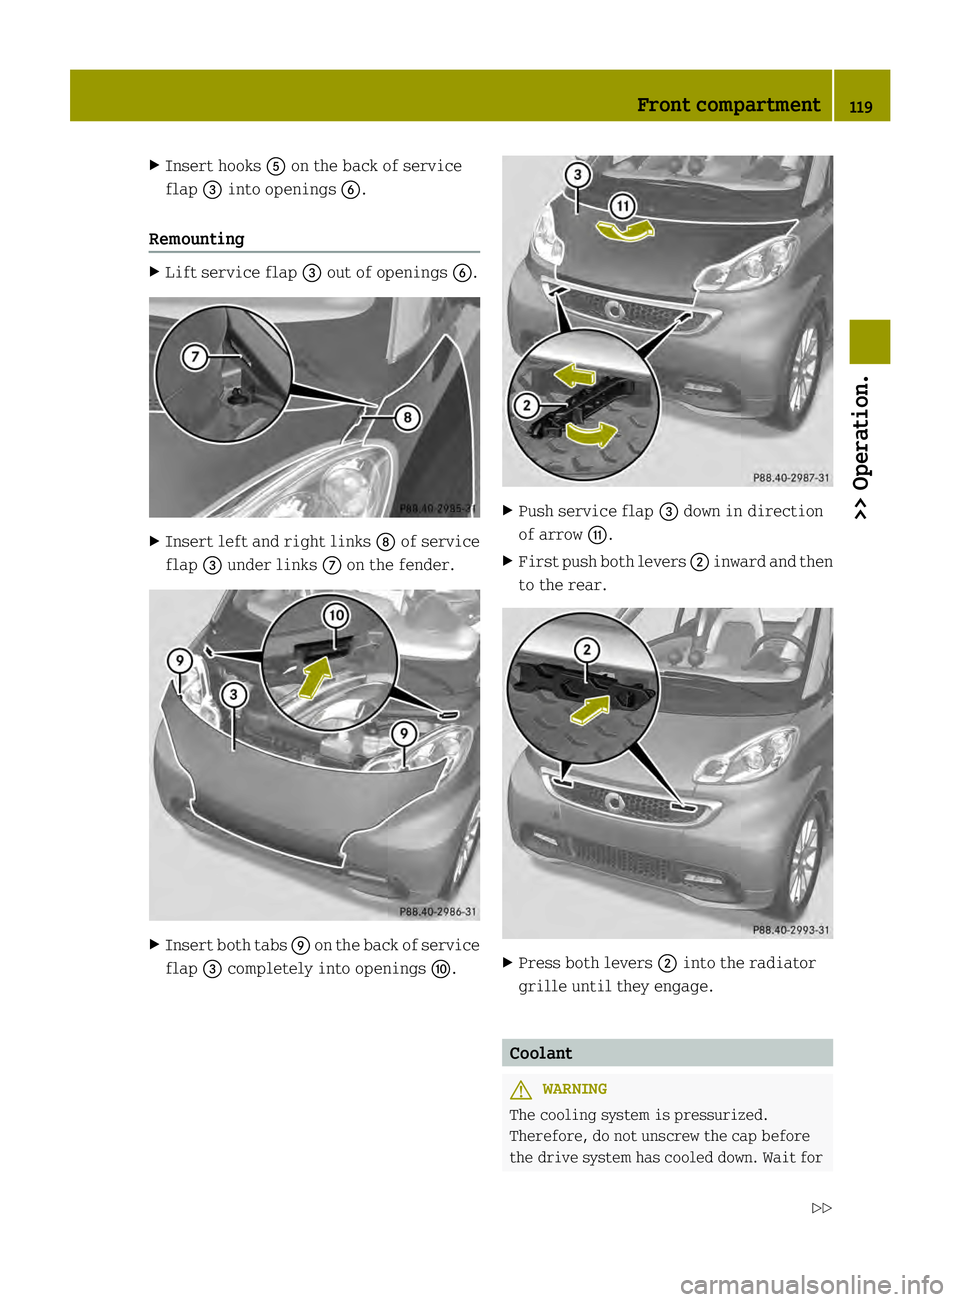 SMART FORTWO COUPE ELECTRIC DRIVE 2013  Owners Manual X
Insert hooks 0028on the back of service
flap 002Binto openings 0029.
Remounting X
Lift service flap 002Bout of openings 0029. X
Insert left and right links 0019of service
flap 002Bunder links 0018on